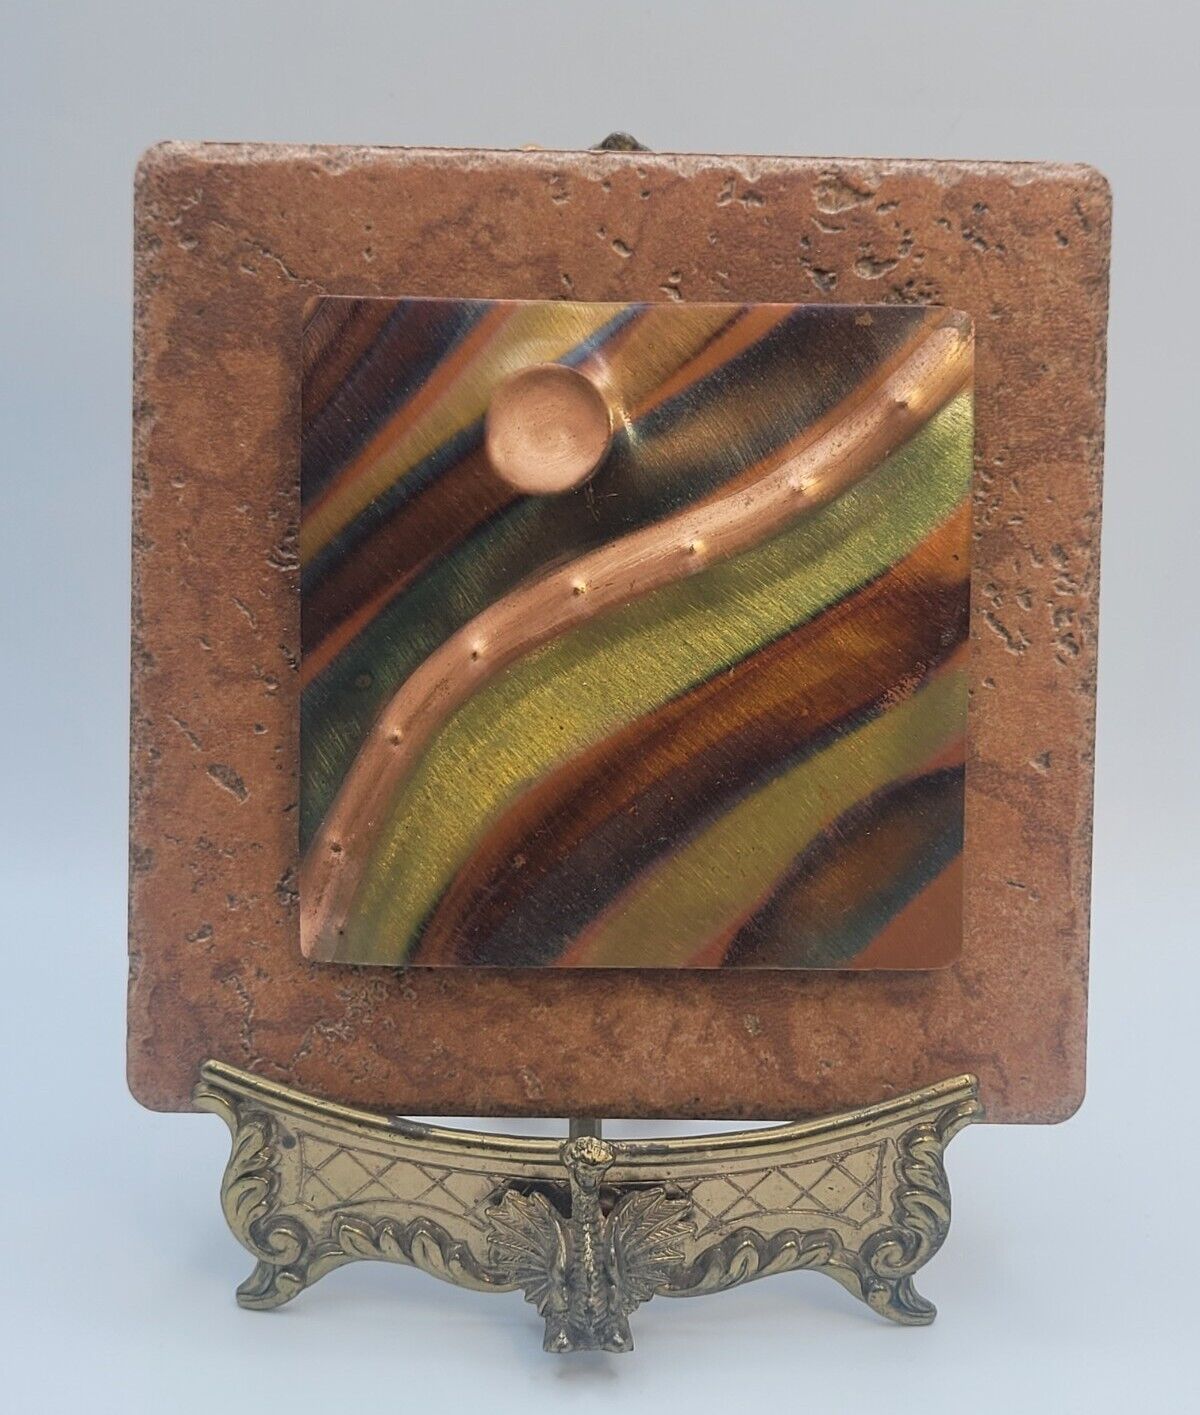 Stunning Copper Art On Stone Tile • Colorful Scenic Art On Copper Tile • Italy 